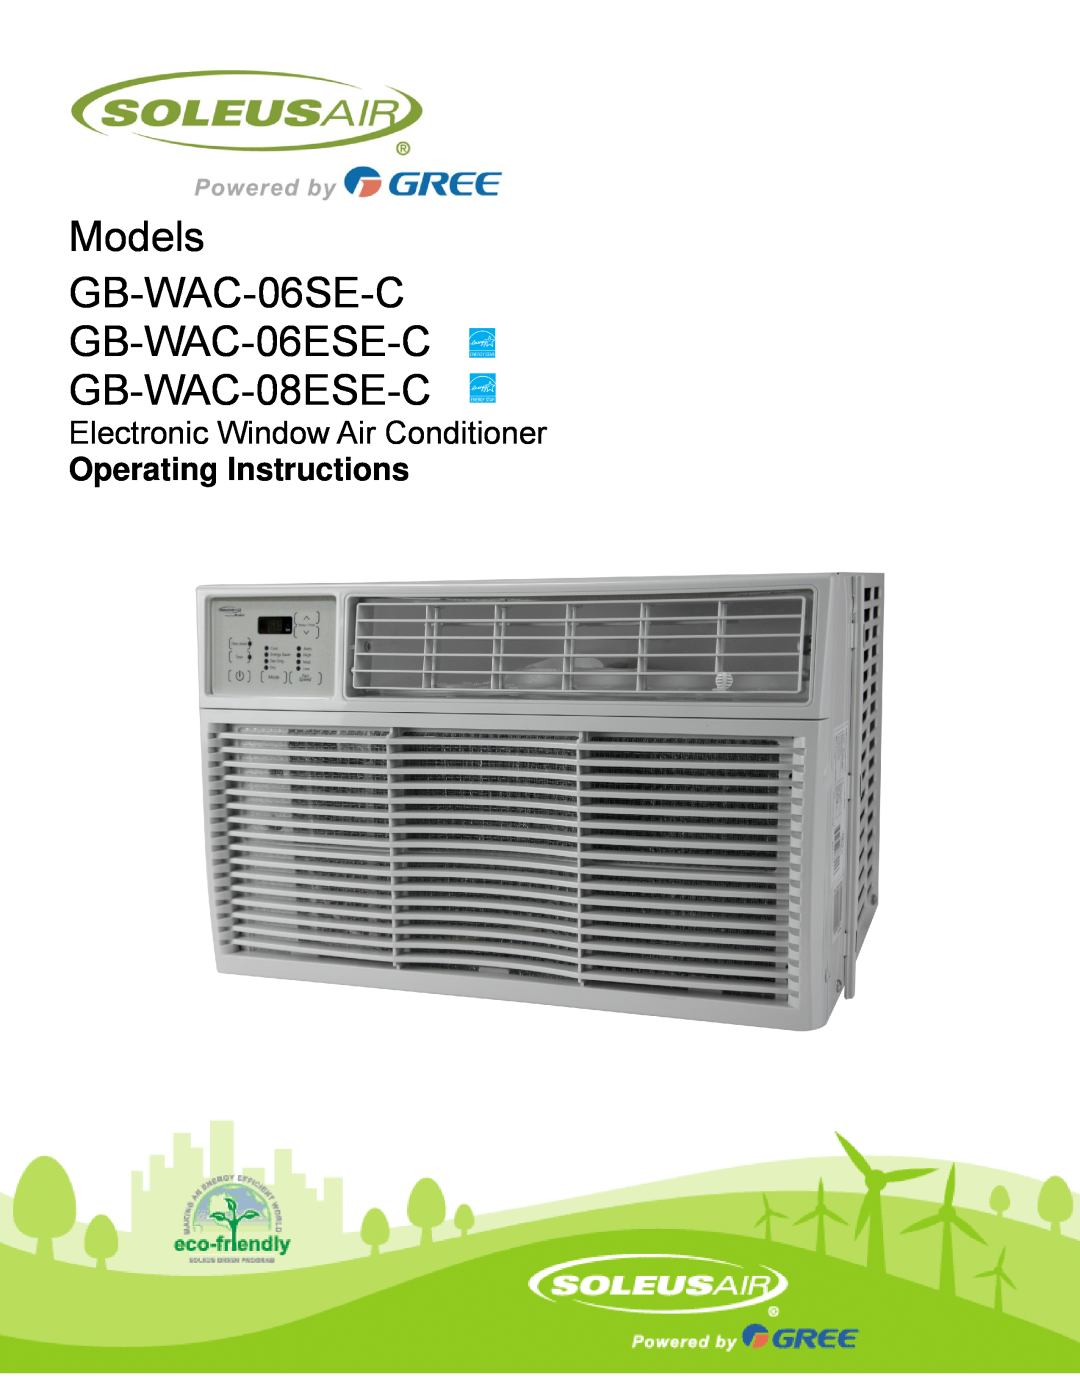 Soleus Air GB-WAC-06ESE-C, GB-WAC-06SE-C operating instructions Electronic Window Air Conditioner, Operating Instructions 